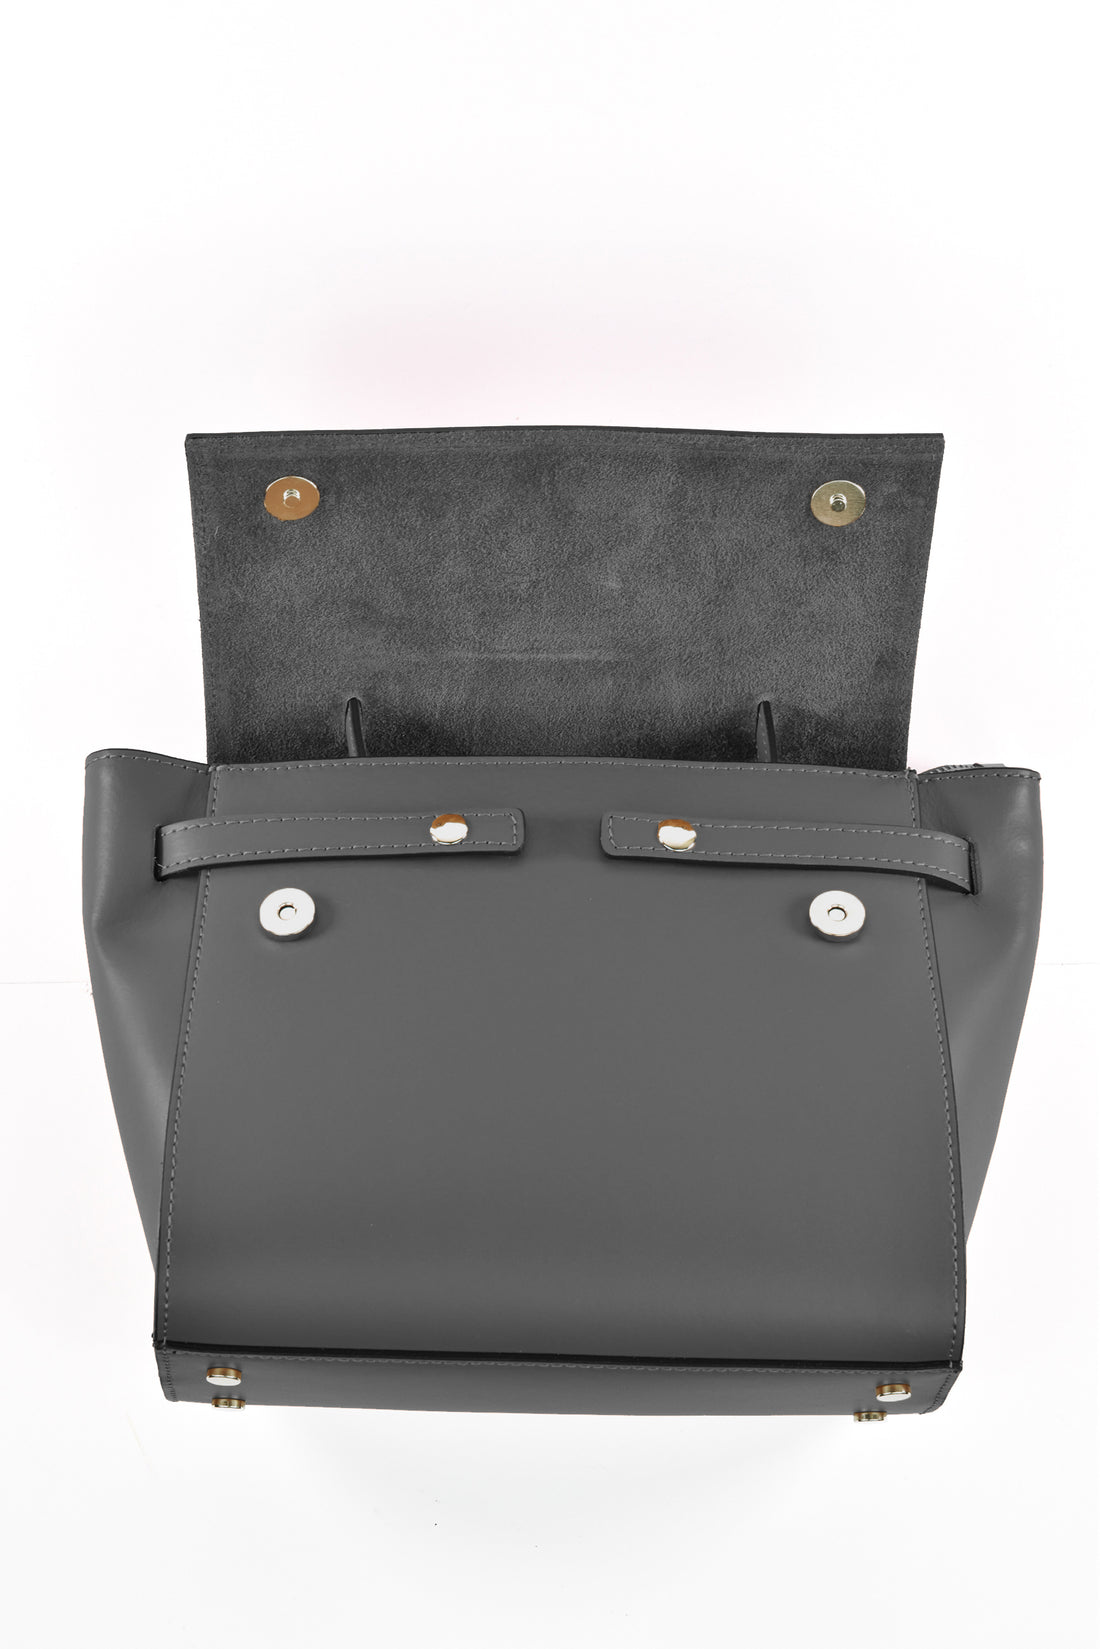 Miù bag in gray brushed leather